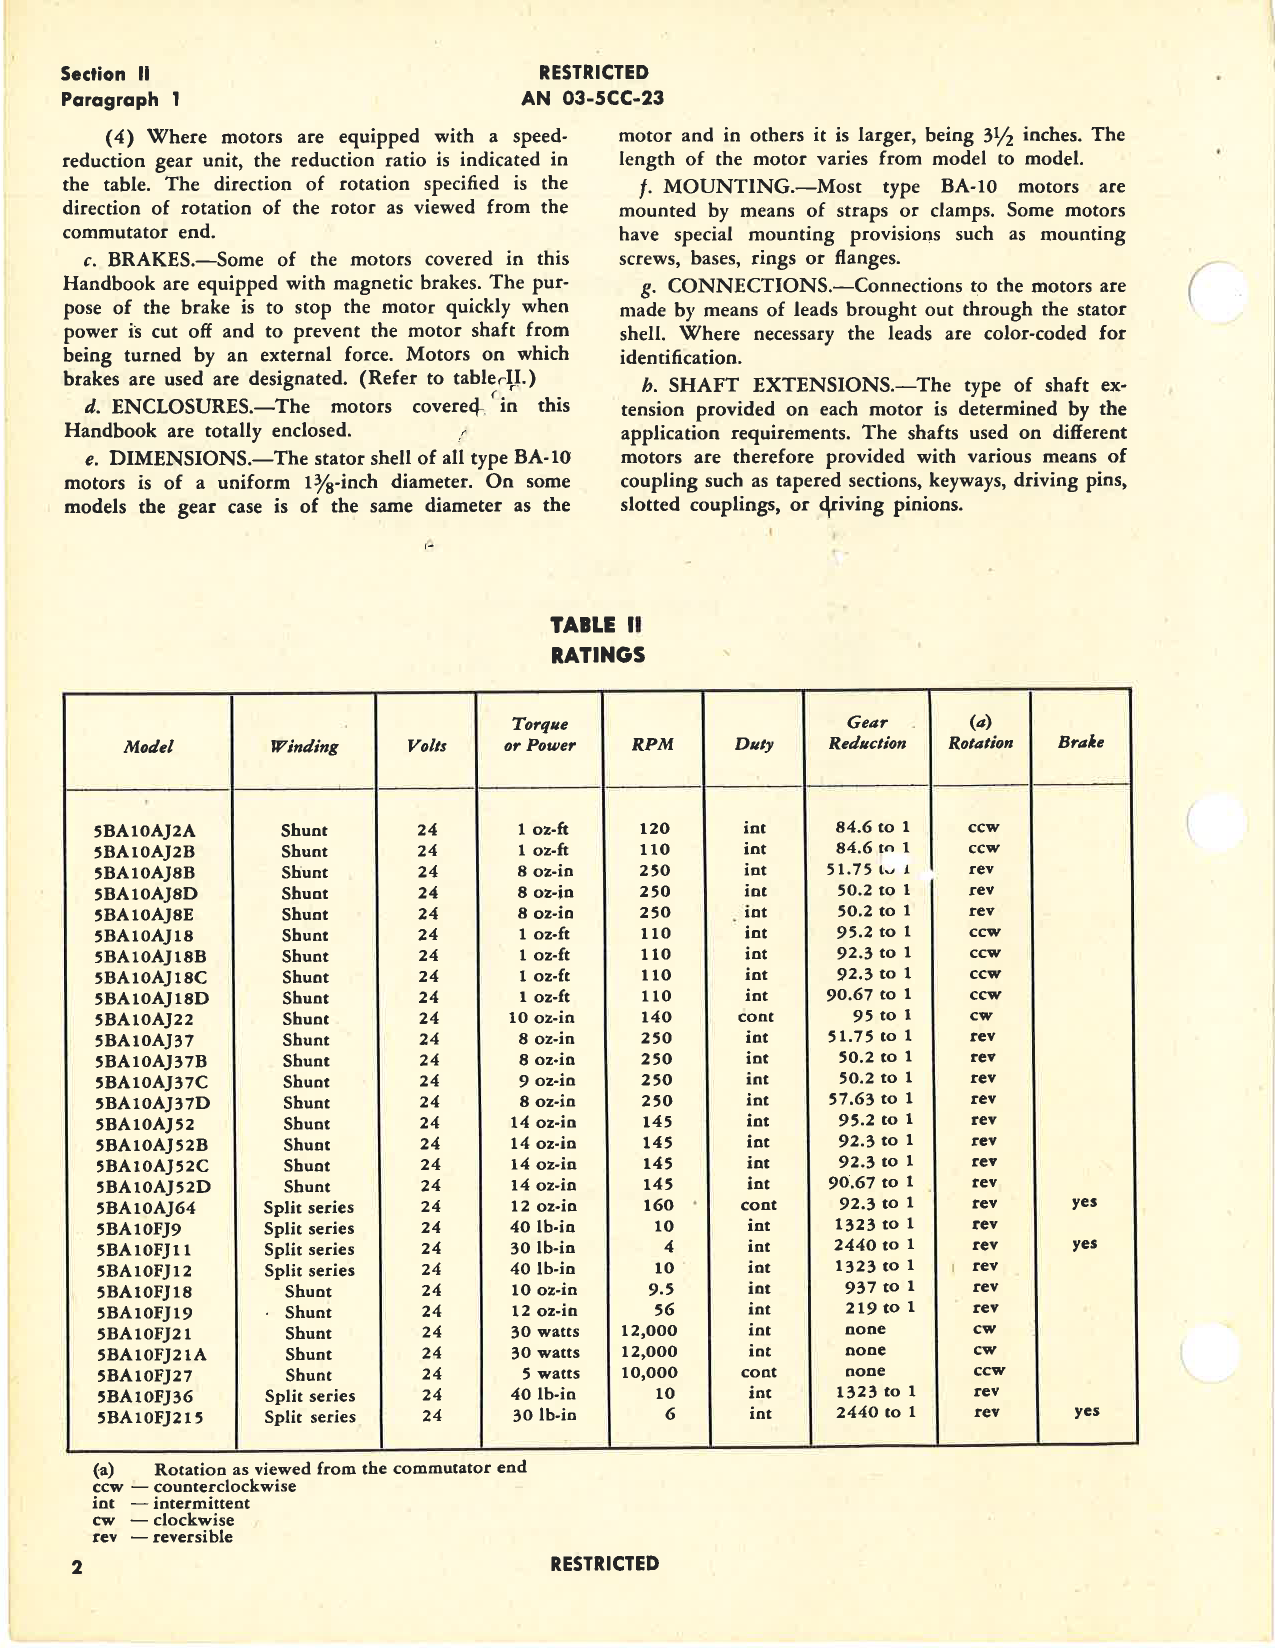 Sample page 8 from AirCorps Library document: Handbook of Instructions with Parts Catalog for Aircraft Electric Motors Model 5BA10 Series